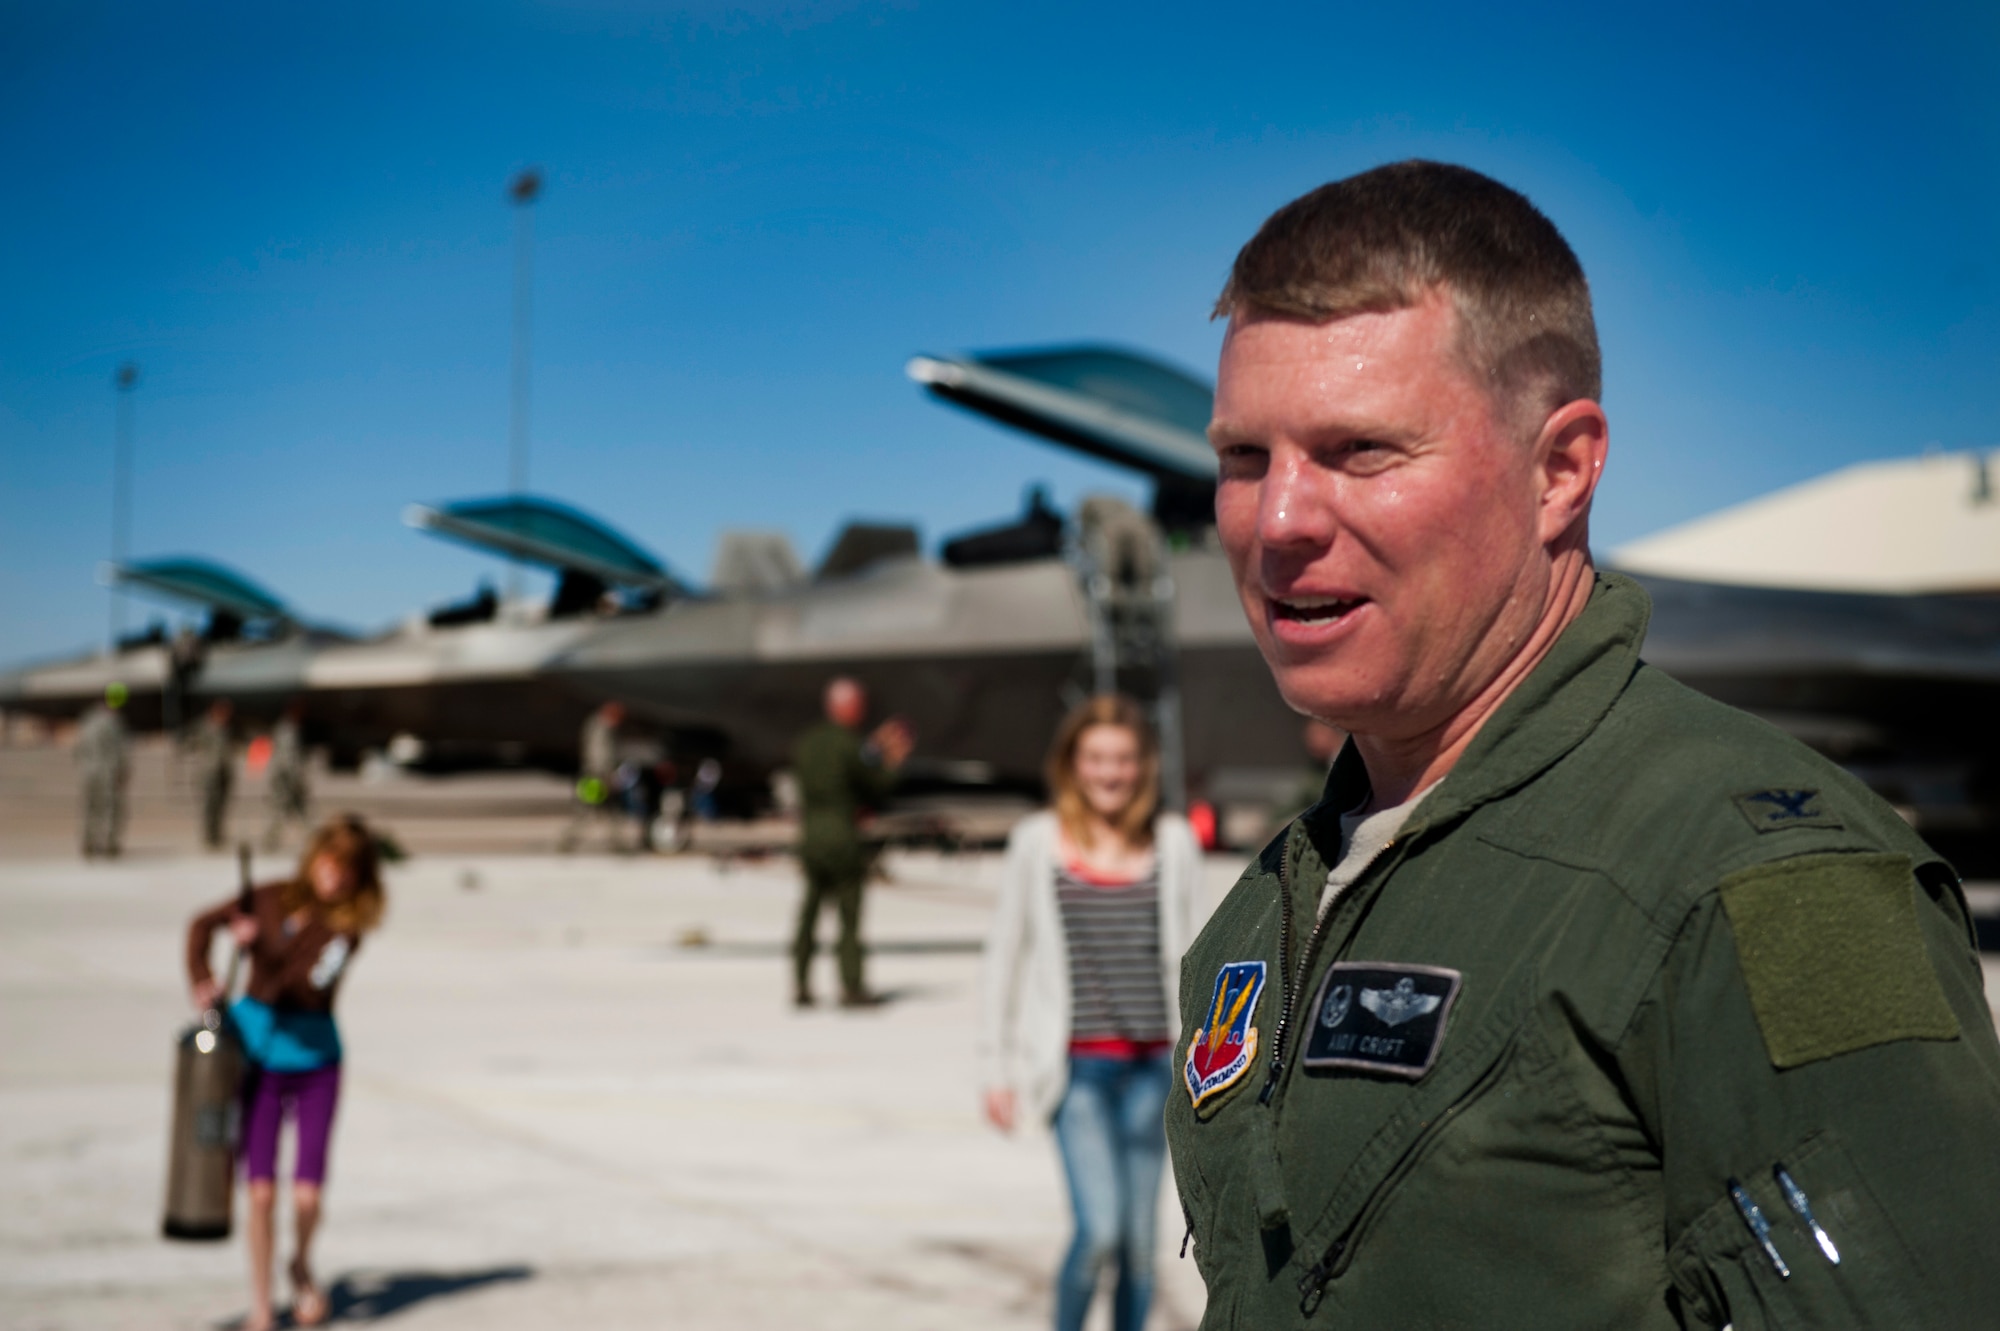 Colonel Andrew Croft, 49th Wing commander, greets his visitors after finishing his final flight in the F-22 Raptor at Holloman Air Force Base, N.M., Feb. 20. The 7th Fighter Squadron and members of the Holloman community celebrated this sortie before the F-22s depart for Tyndall Air Force Base, Fla., in early April. (U.S. Air Force photo by Airman 1st Class Aaron Montoya / Released)